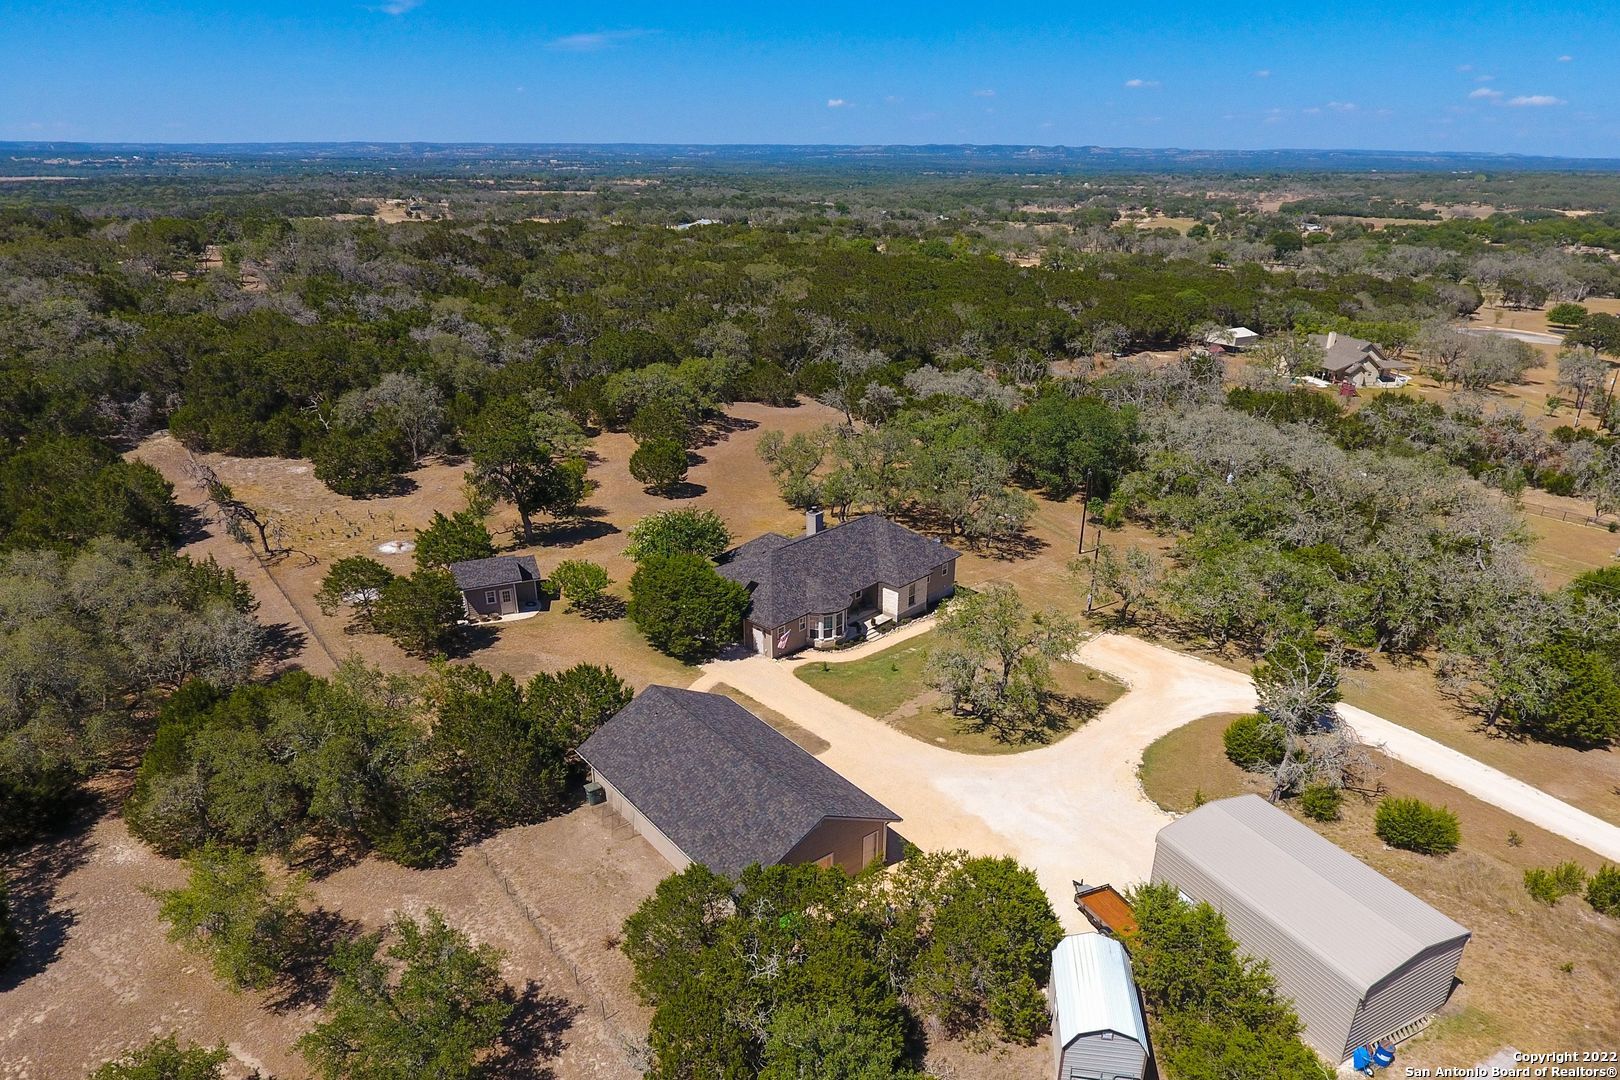 Enjoy 5 private acres in the Texas Hill Country.  2200 sqft 3BD/2 1/2 bath (new roof).  Detached 28 x 48 3 car garage, including a semi-finished in-law, guest quarters approx 400 sqft . 23x 35 sqft RV GARAGE 12 ft remote door with 70-amp power, room for toys and more.  Matching pump house with 2500-gallon storage tank including Pelican water treatment system offering 15 + gal per minute water pressure.  2021 remodeled kitchen boasts new energy efficient appliances with large deep sink and easily accessible storage pantry.  Semi-open floorplan for indoor/outdoor entertaining. Utility/mud room, new 50-gal water heater. HVAC has a transferable waranty. Expansive park-like backyard with room for custom pool, greenhouse, raised garden or barn for horses.  See the sparkling stars in the dark skies neighborhood.